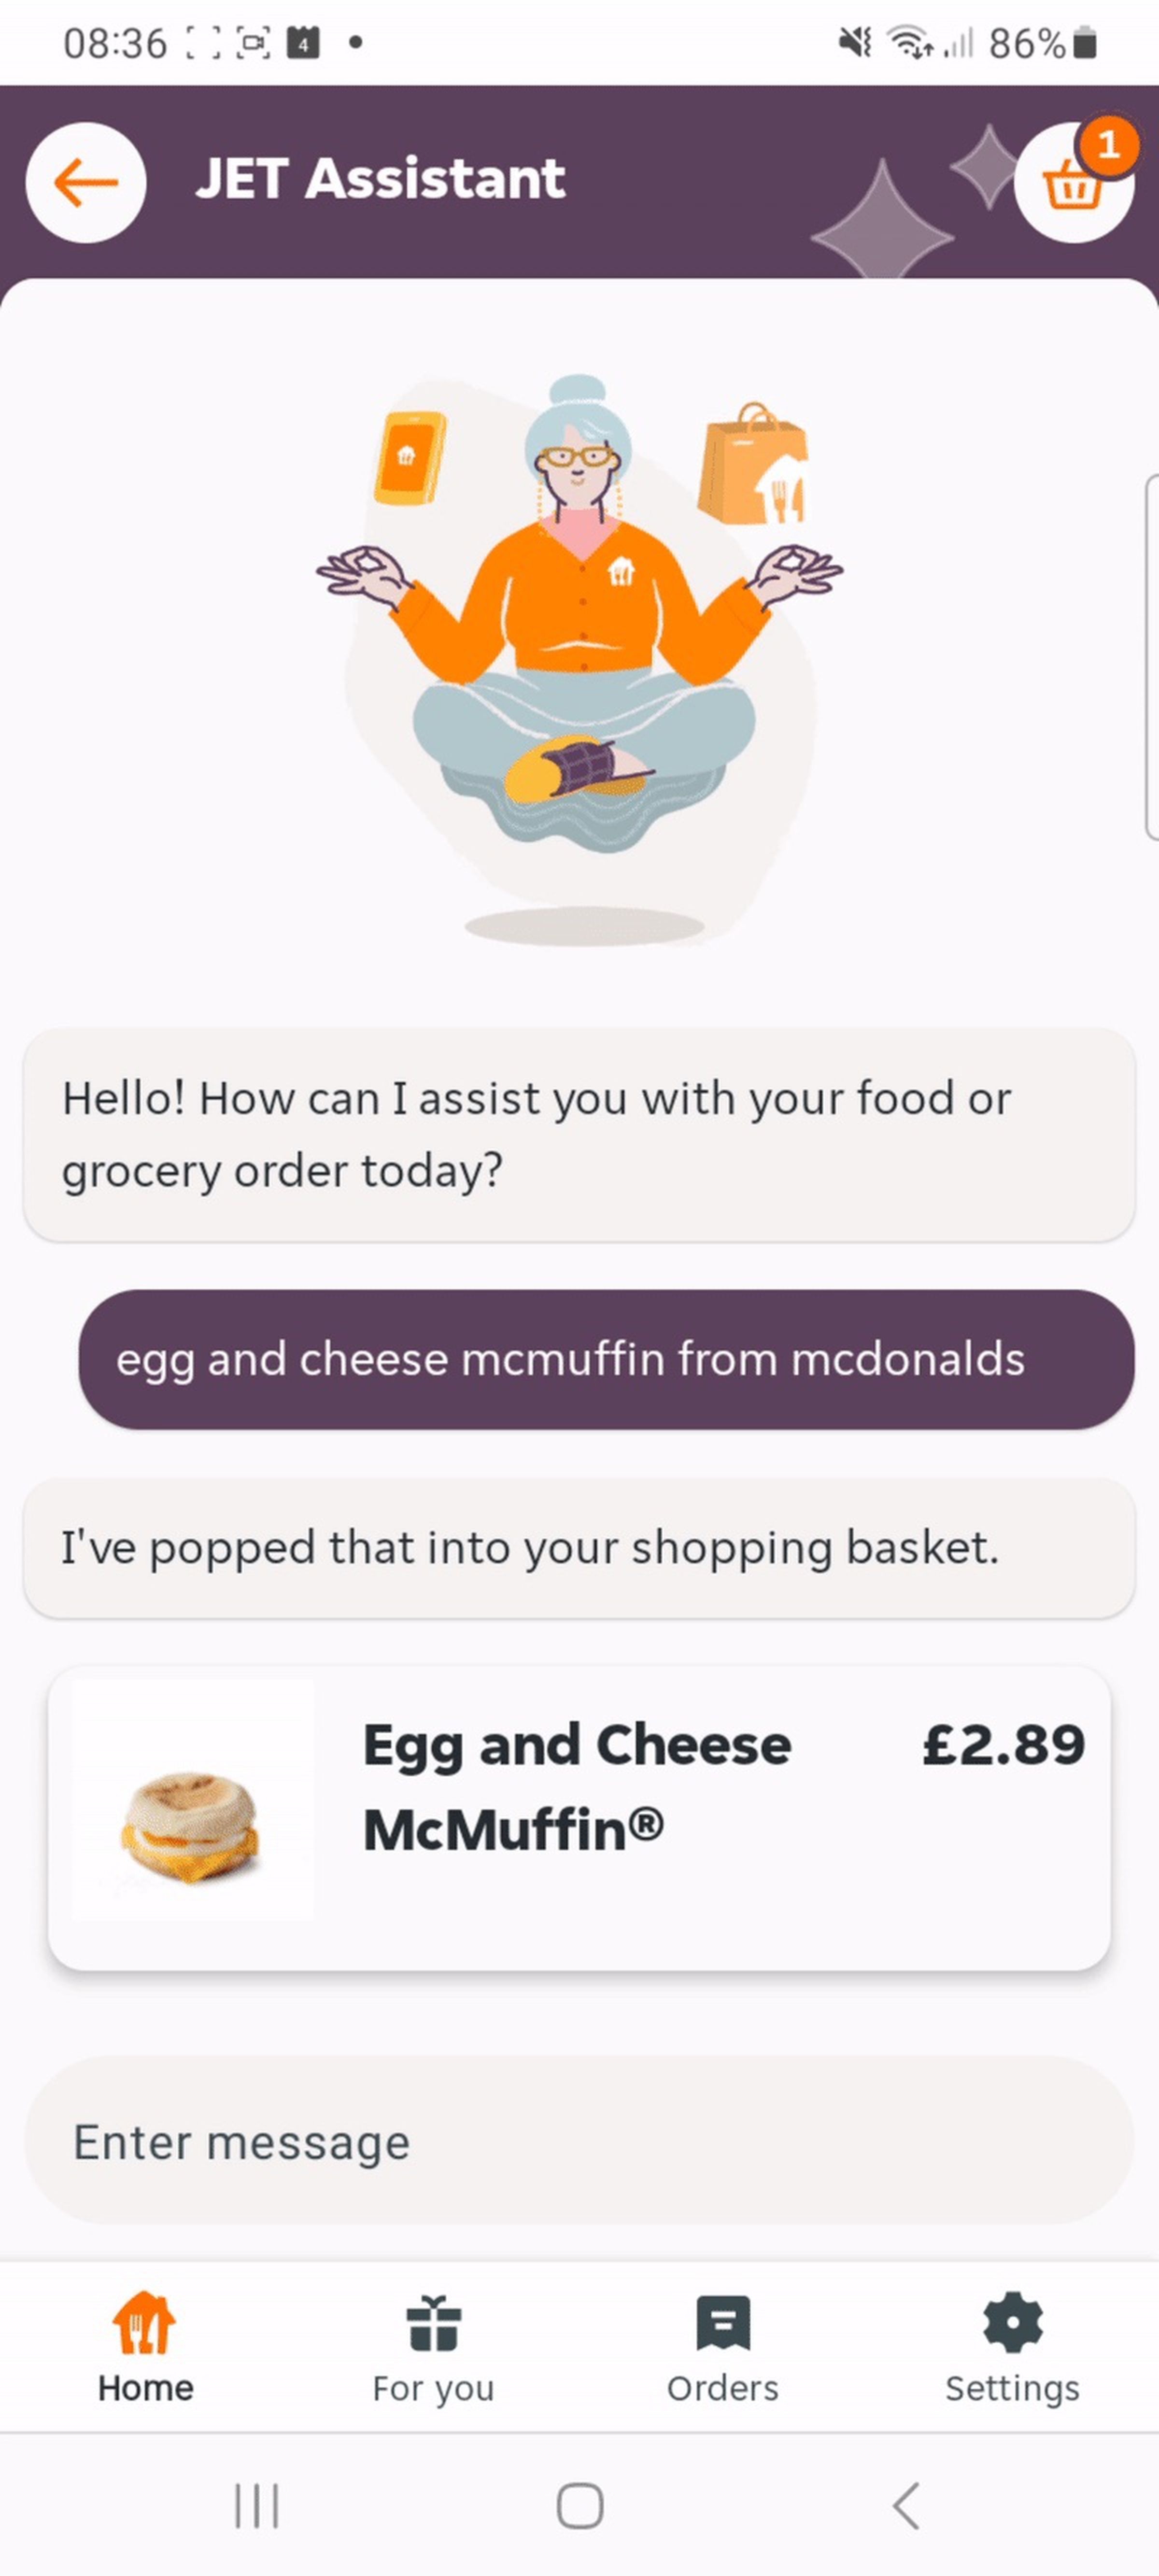 Just Eat chatbot adds “egg and cheese mcmuffin” to order.